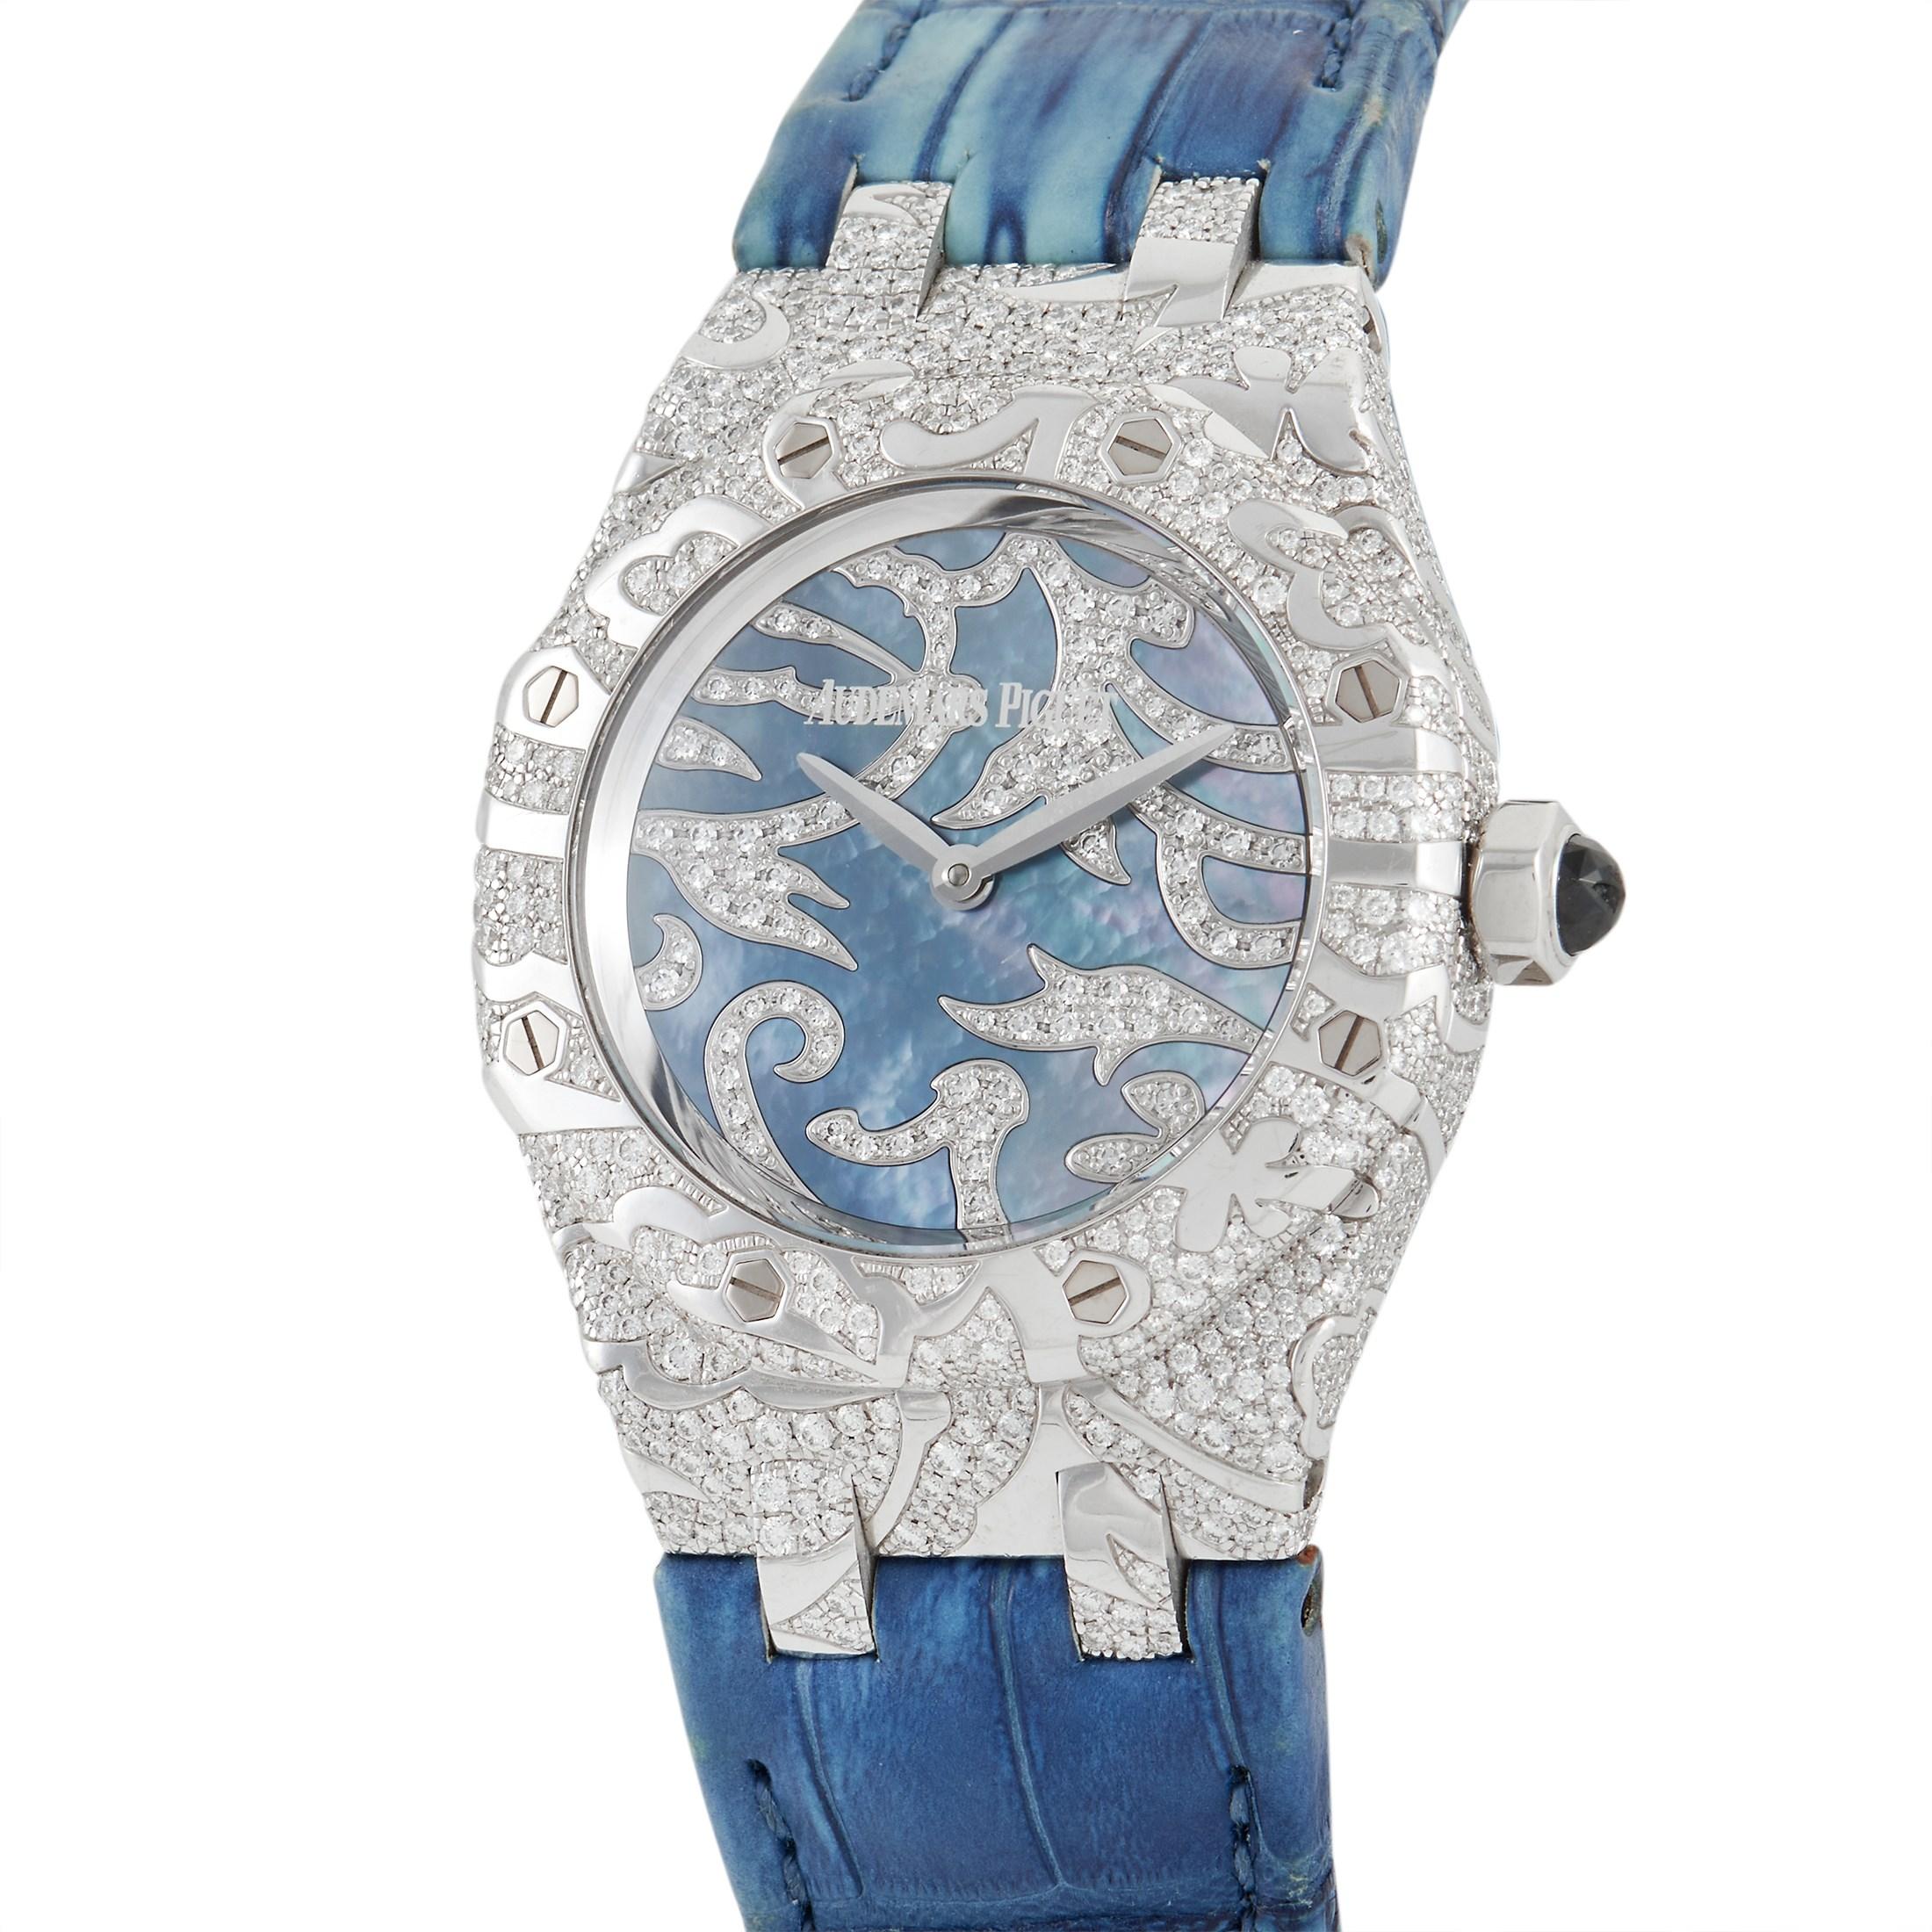 The Audemars Piguet Royal Oak Leaves Ladies Watch, reference number 67607BC.ZZ.D001SU.01, is a chic, sophisticated timepiece with plenty of personality. 

This watch features a 33mm case and bezel featuring glittering diamonds in a stylish 18K White